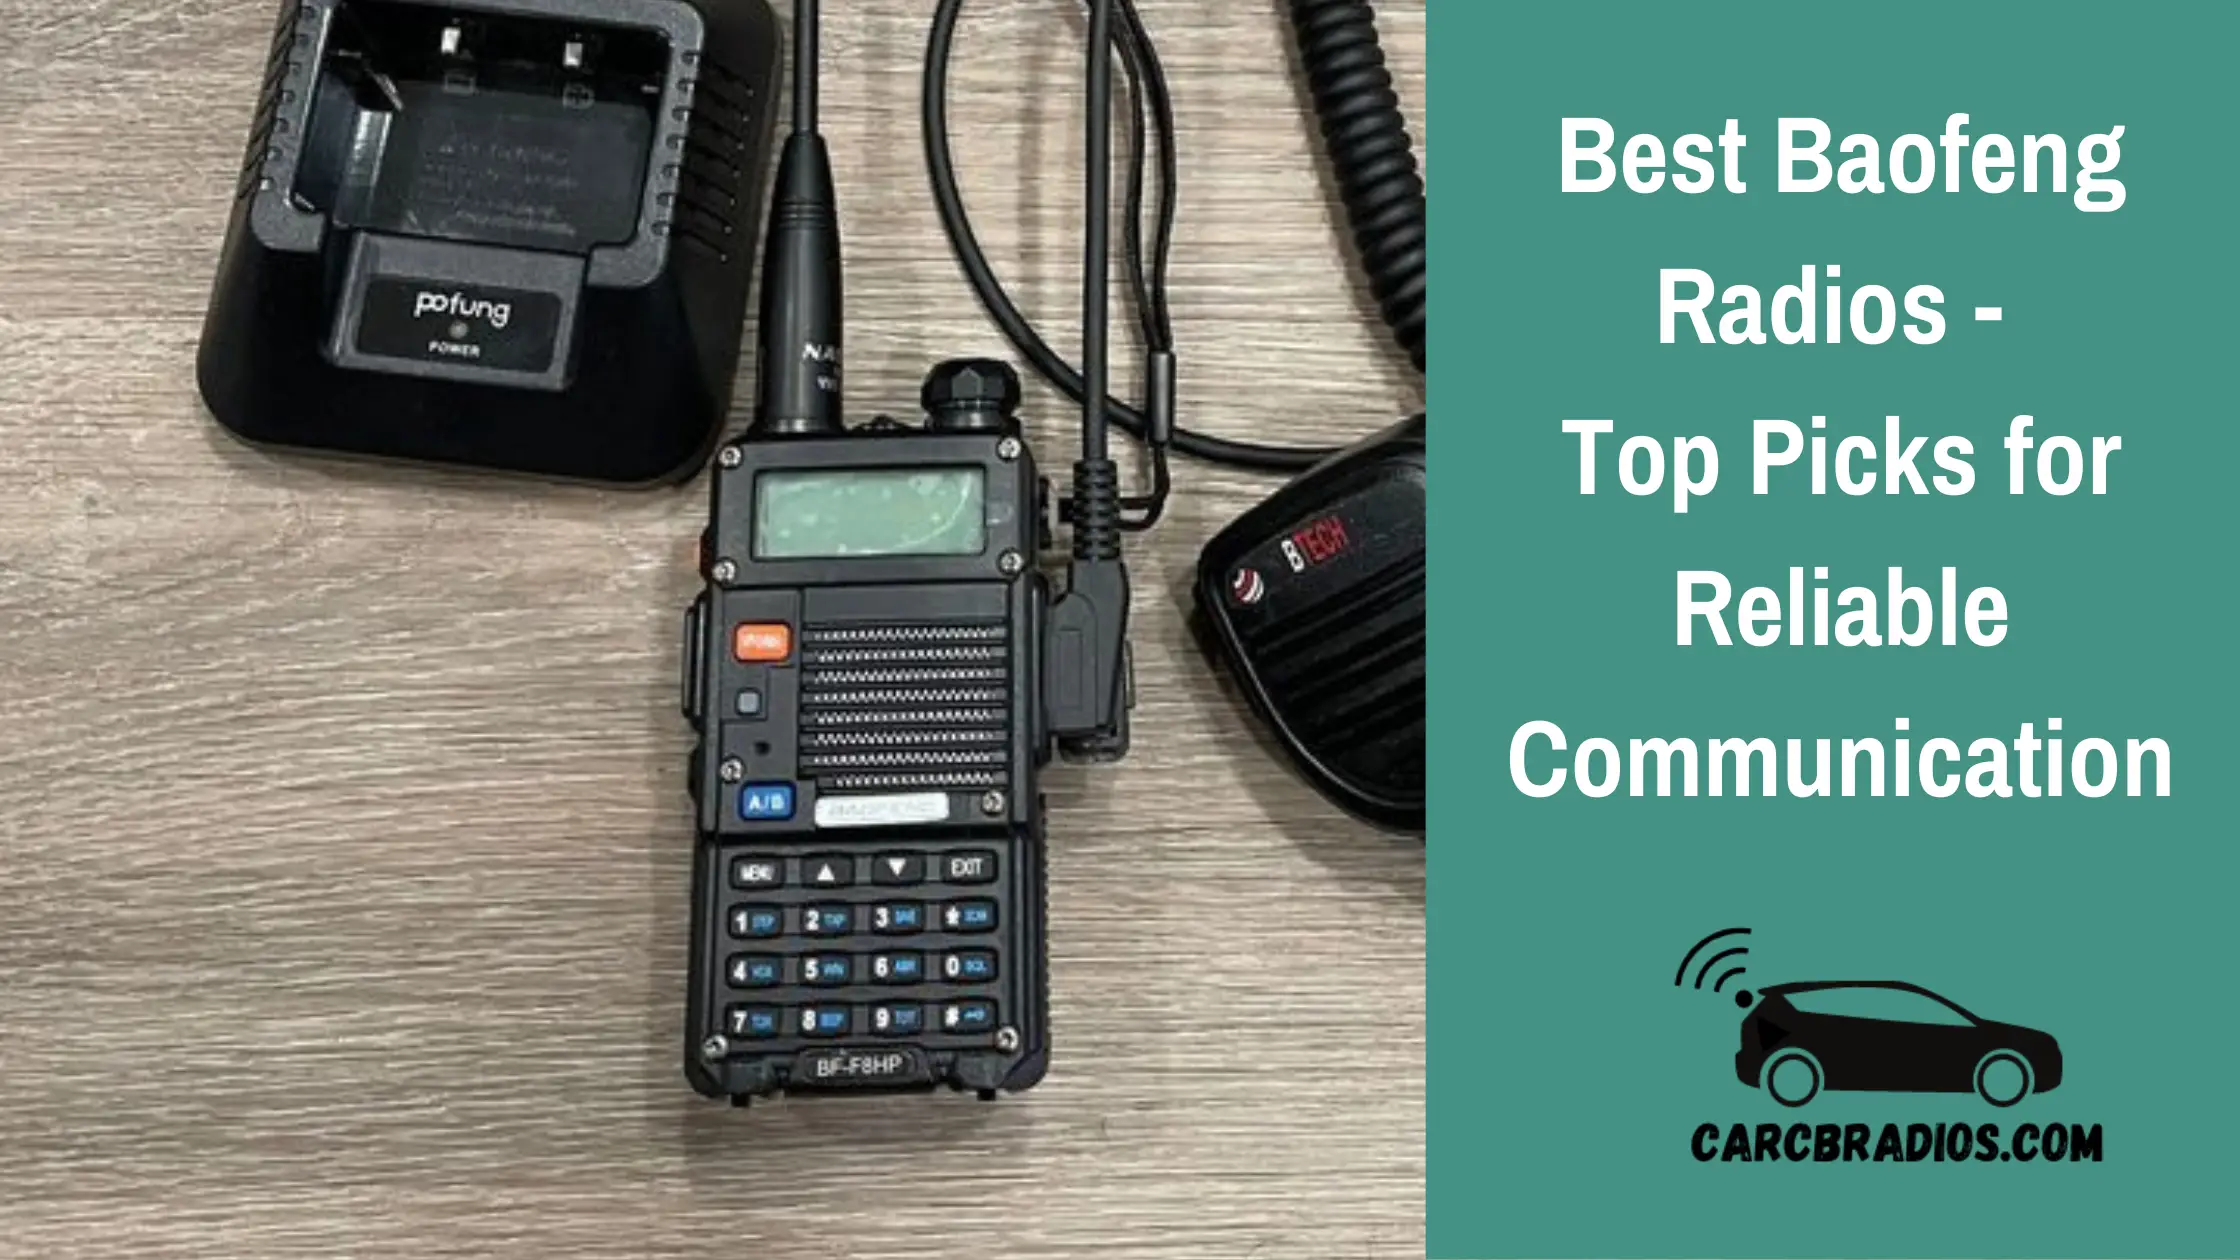 Baofeng radios are a popular choice for those seeking a reliable and durable two-way radio. With so many options on the market, it can be difficult to determine which Baofeng radio is the best fit for your needs. Fortunately, we have compiled a list of the best Baofeng radios available to help you make an informed decision.